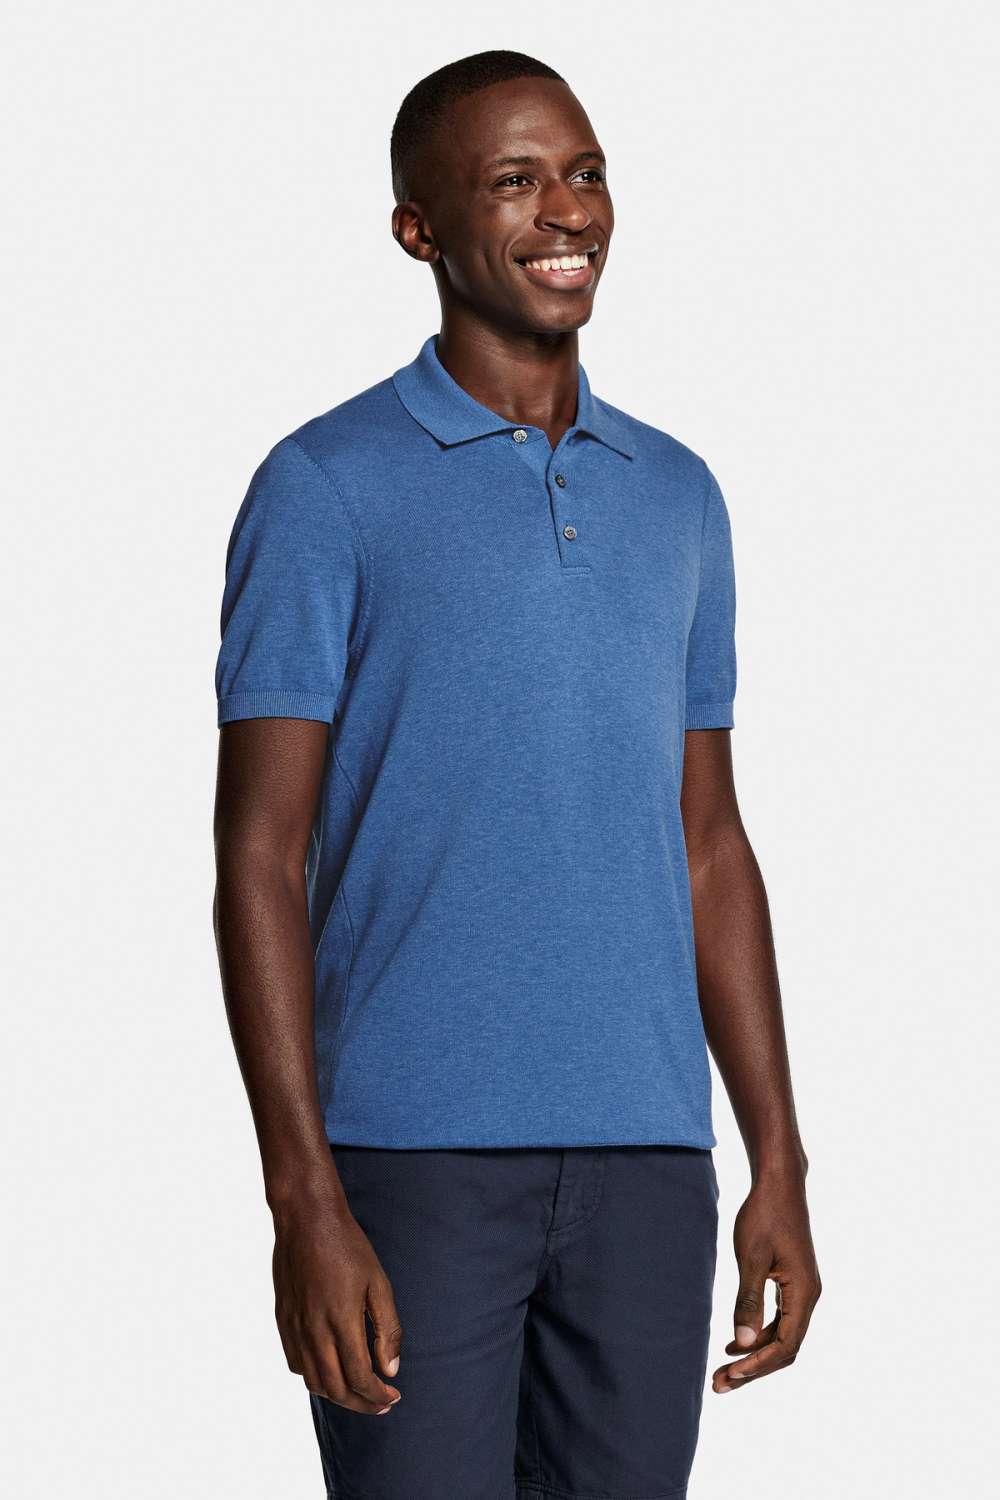 Poolsiders * The Knitted Polo